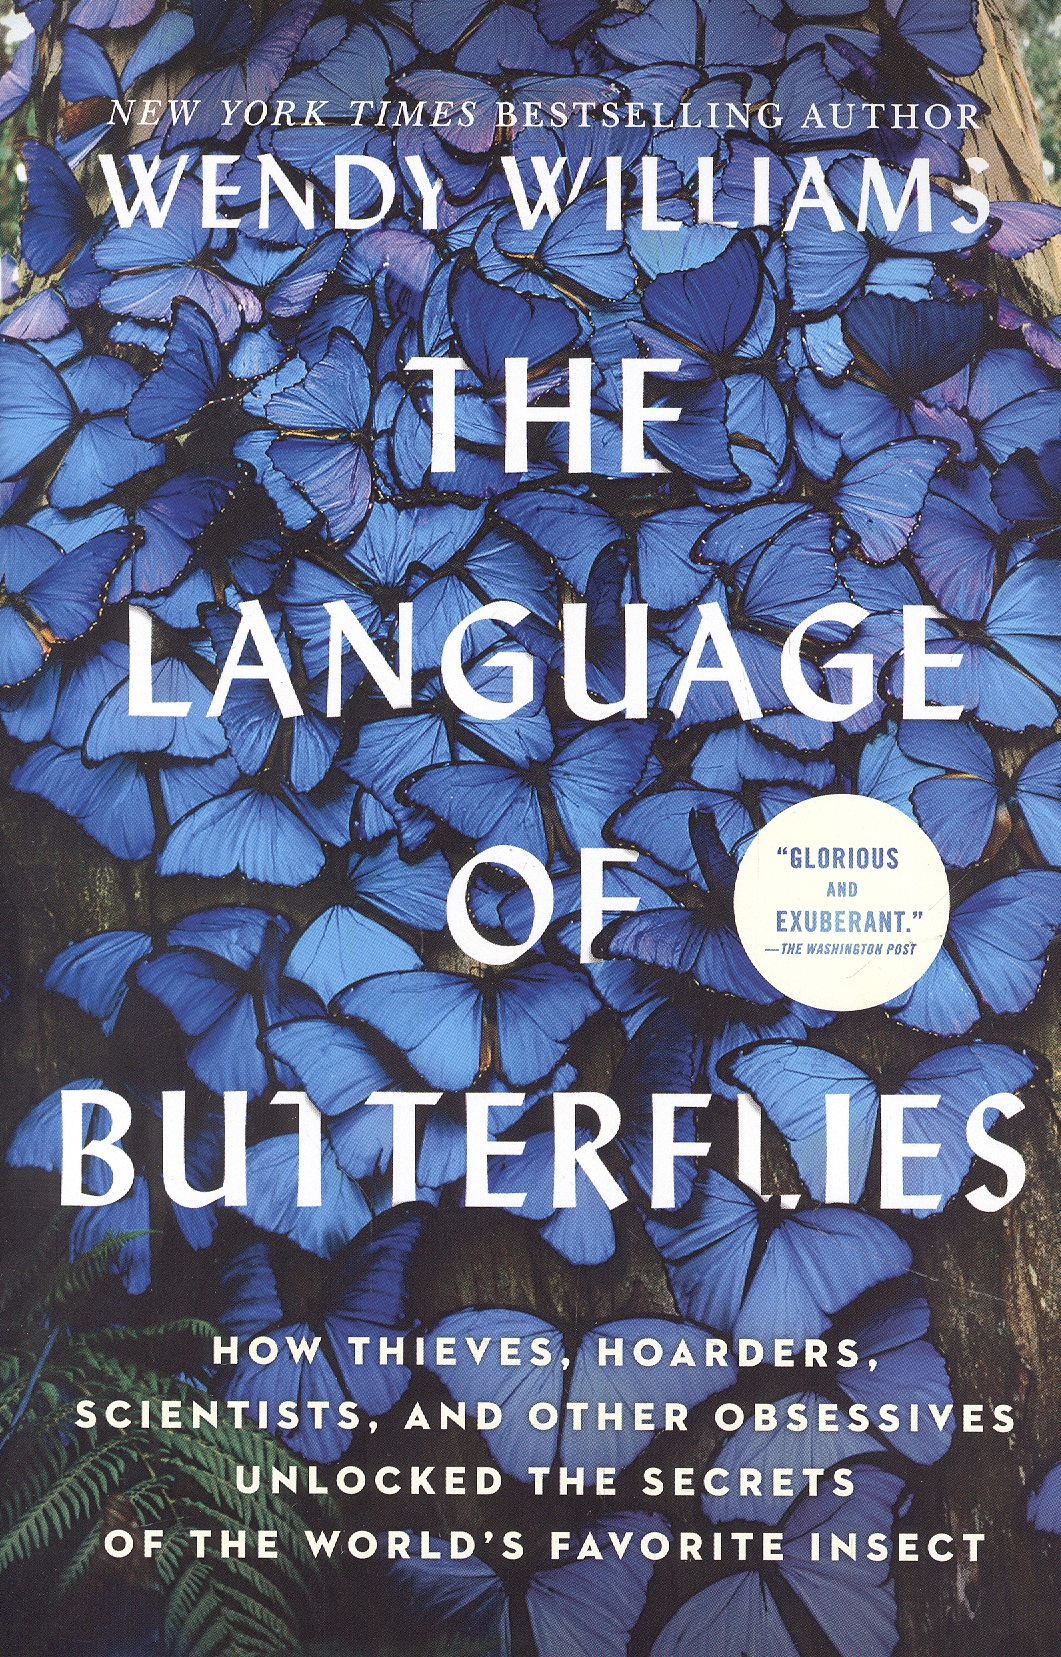 Уильямс Венди - The Language of Butterflies: How Thieves, Hoarders, Scientists, and Other Obsessives...